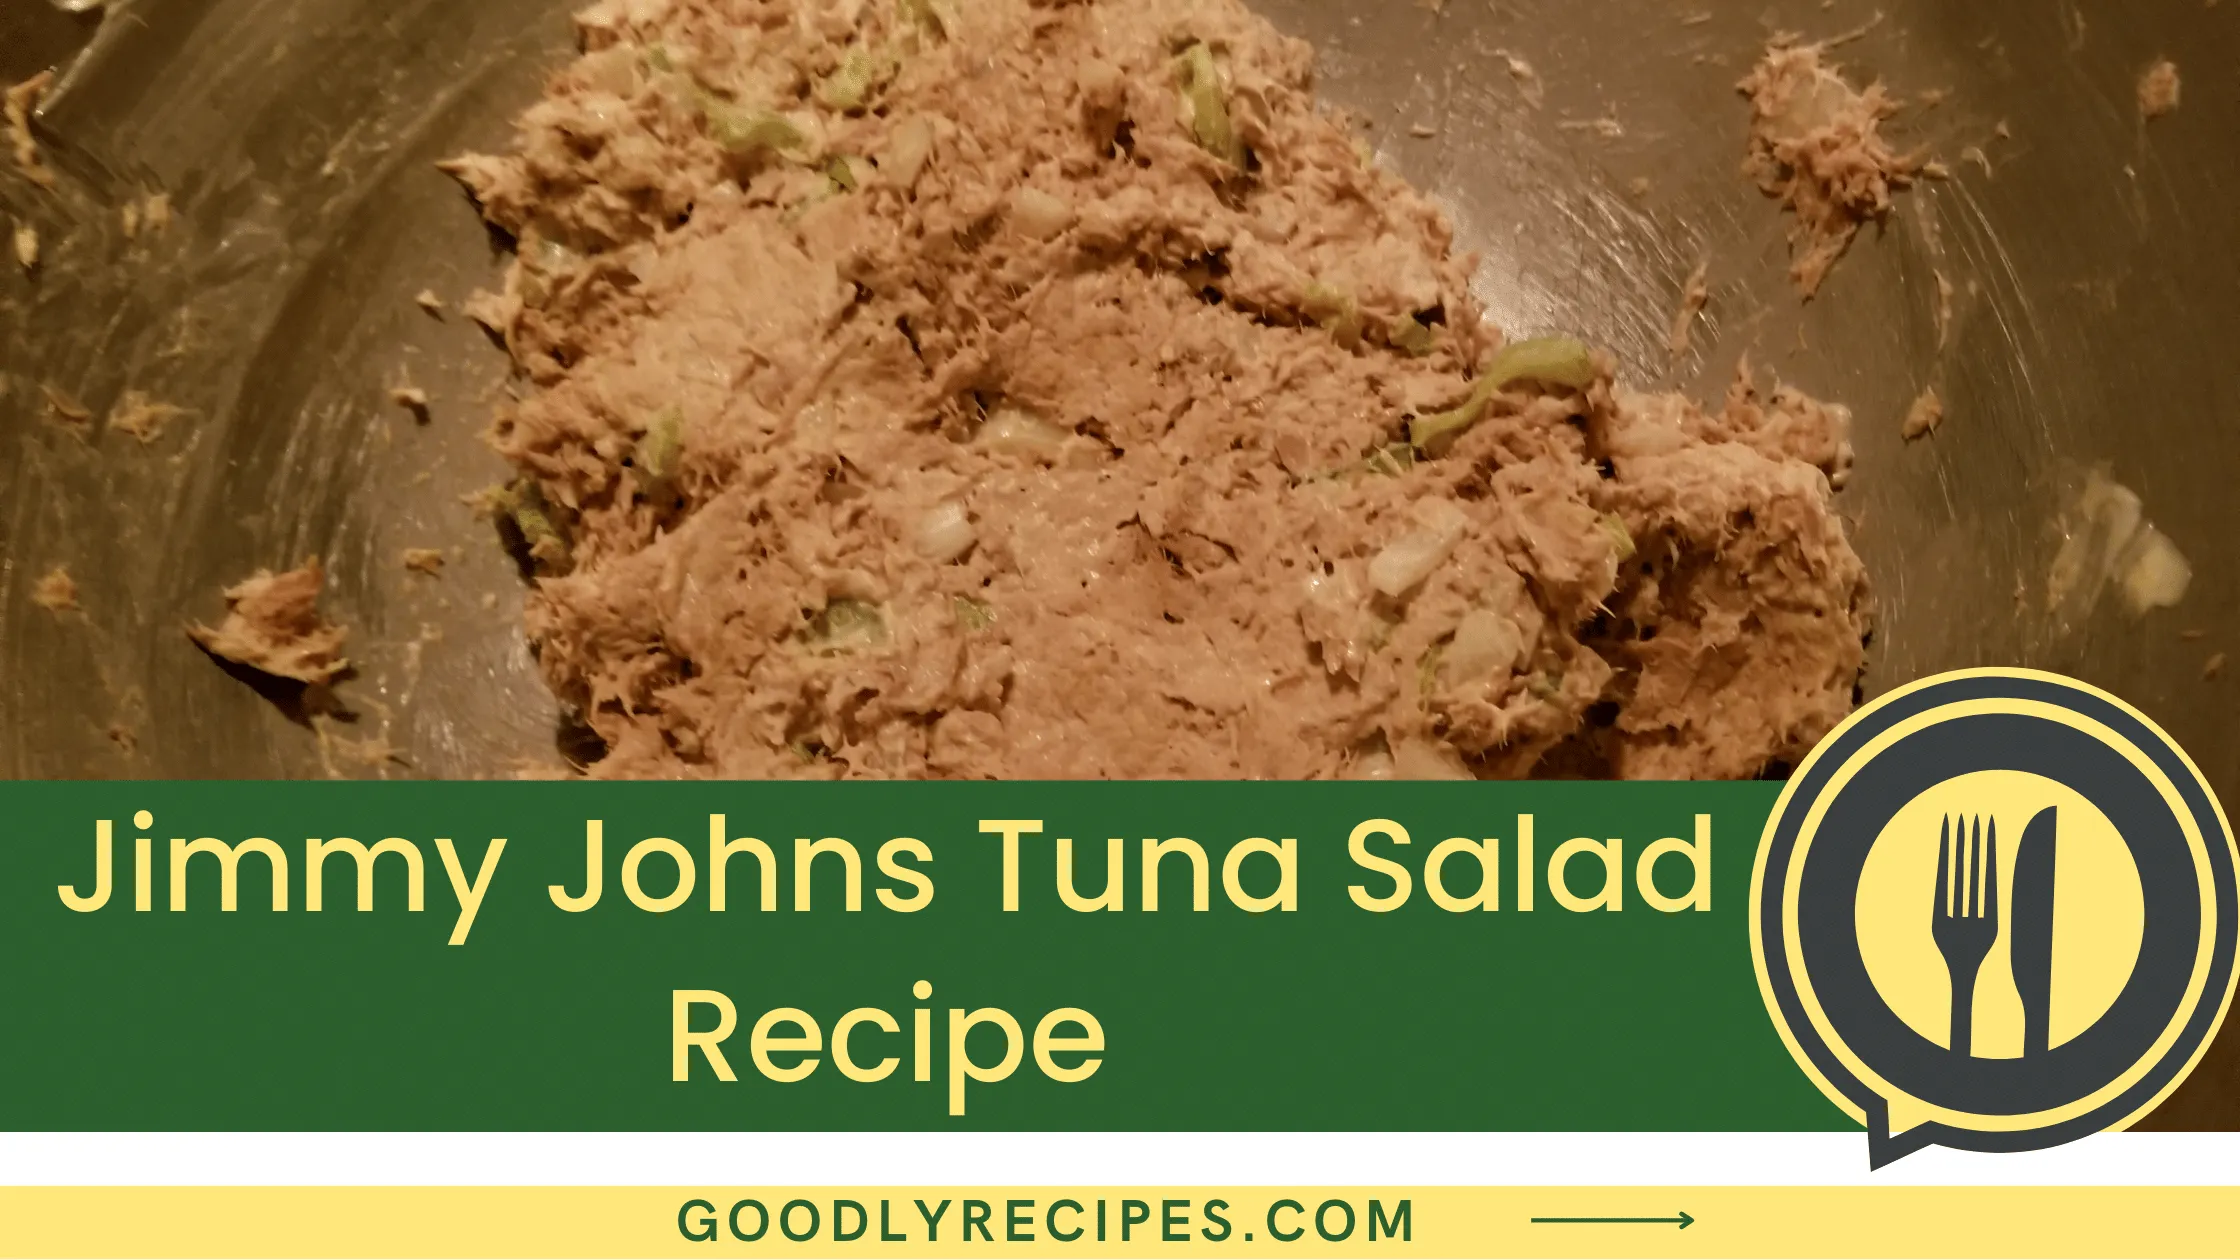 What Is Jimmy Johns Tuna Salad?